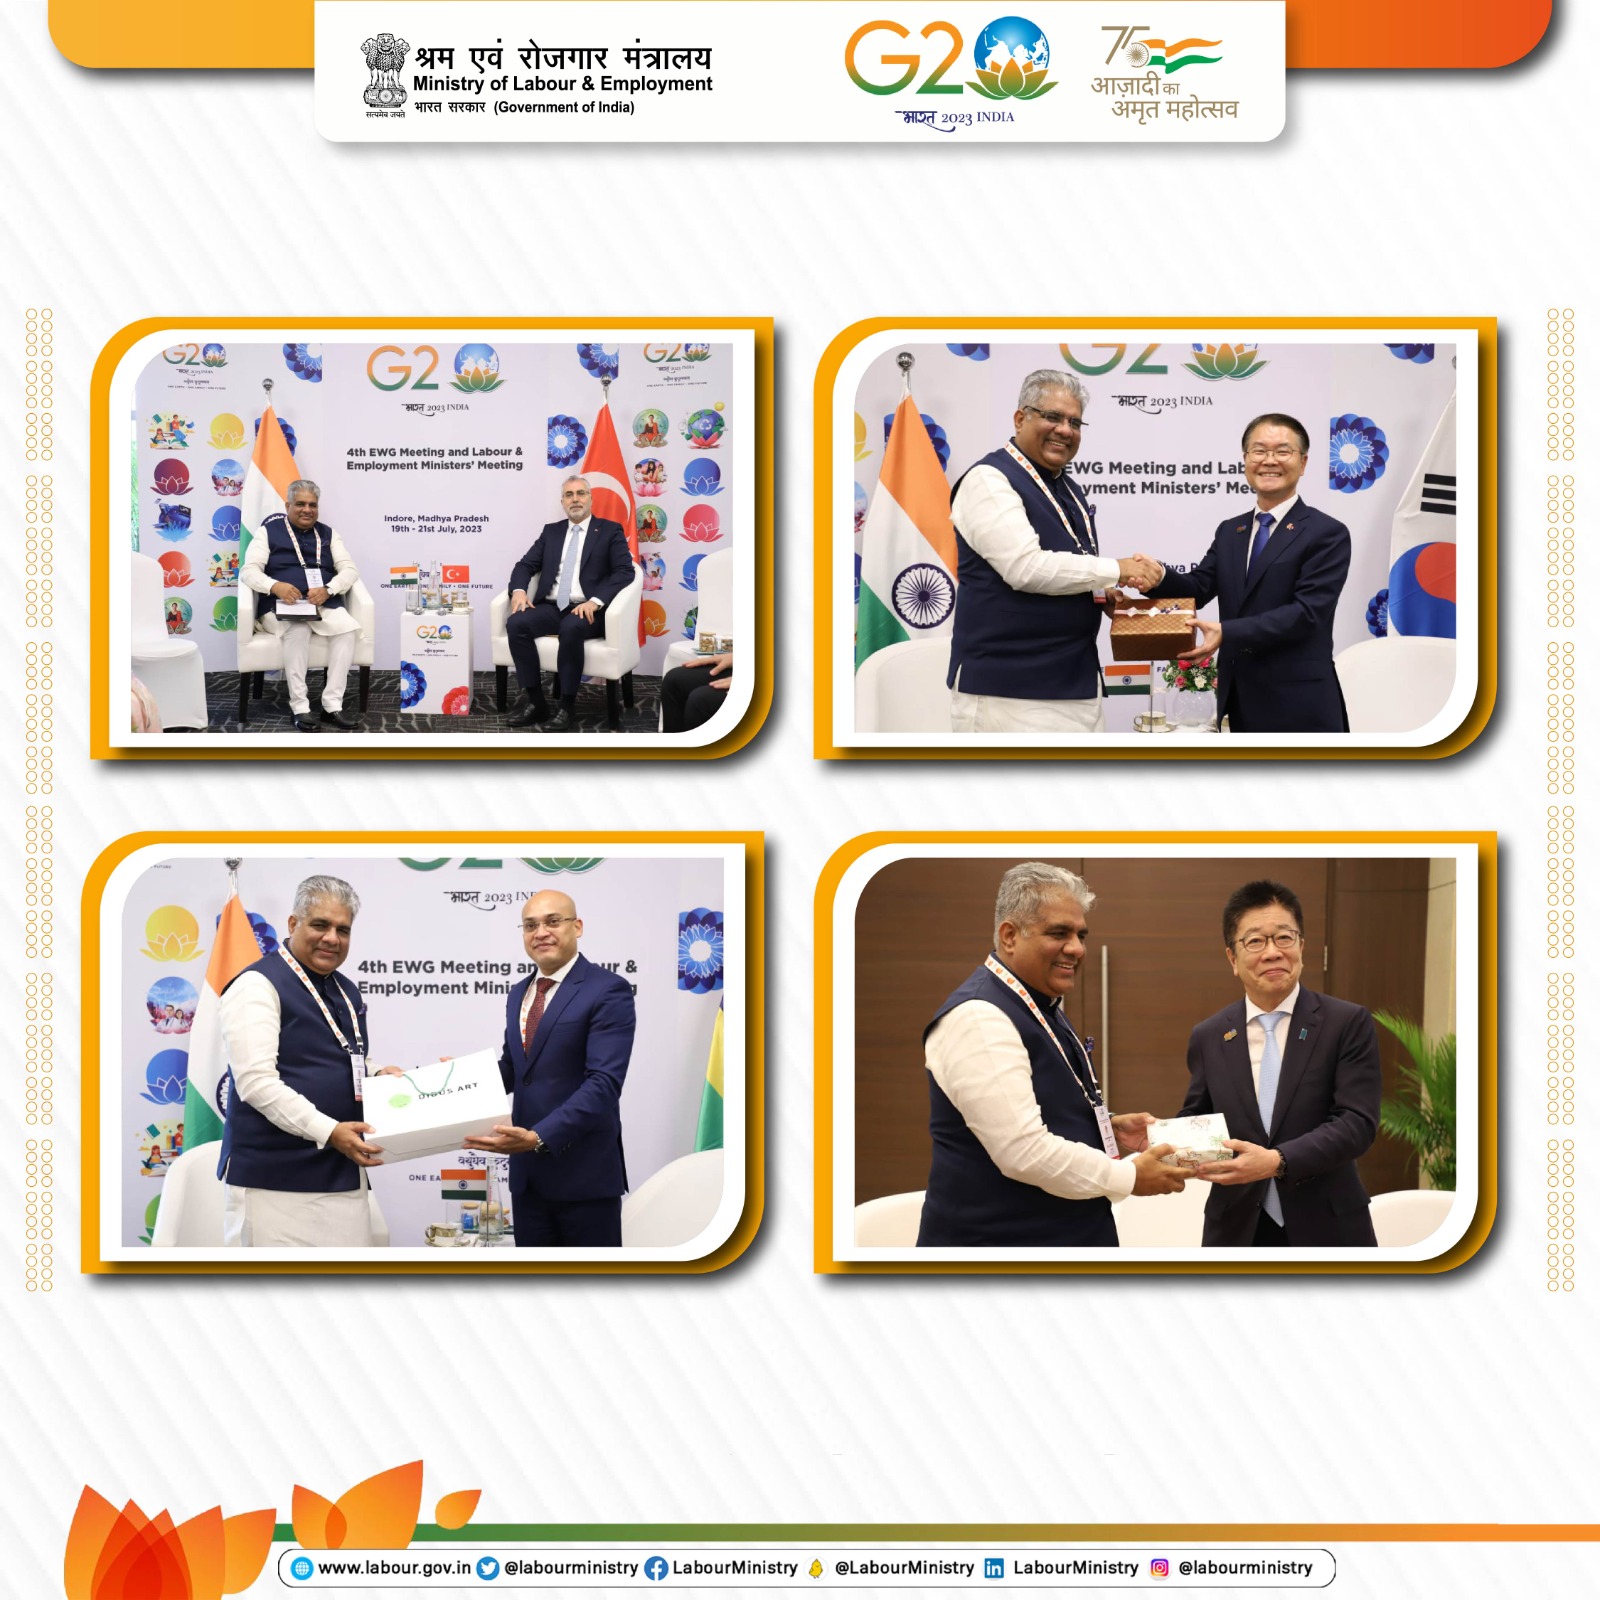 Glimpses of bilateral meetings between India and Turkey,  Mauritius, South Korea and Japan at Ministerial level, at the sidelines of the G20 LEM Meeting, at Indore, Mandhya Pradesh.